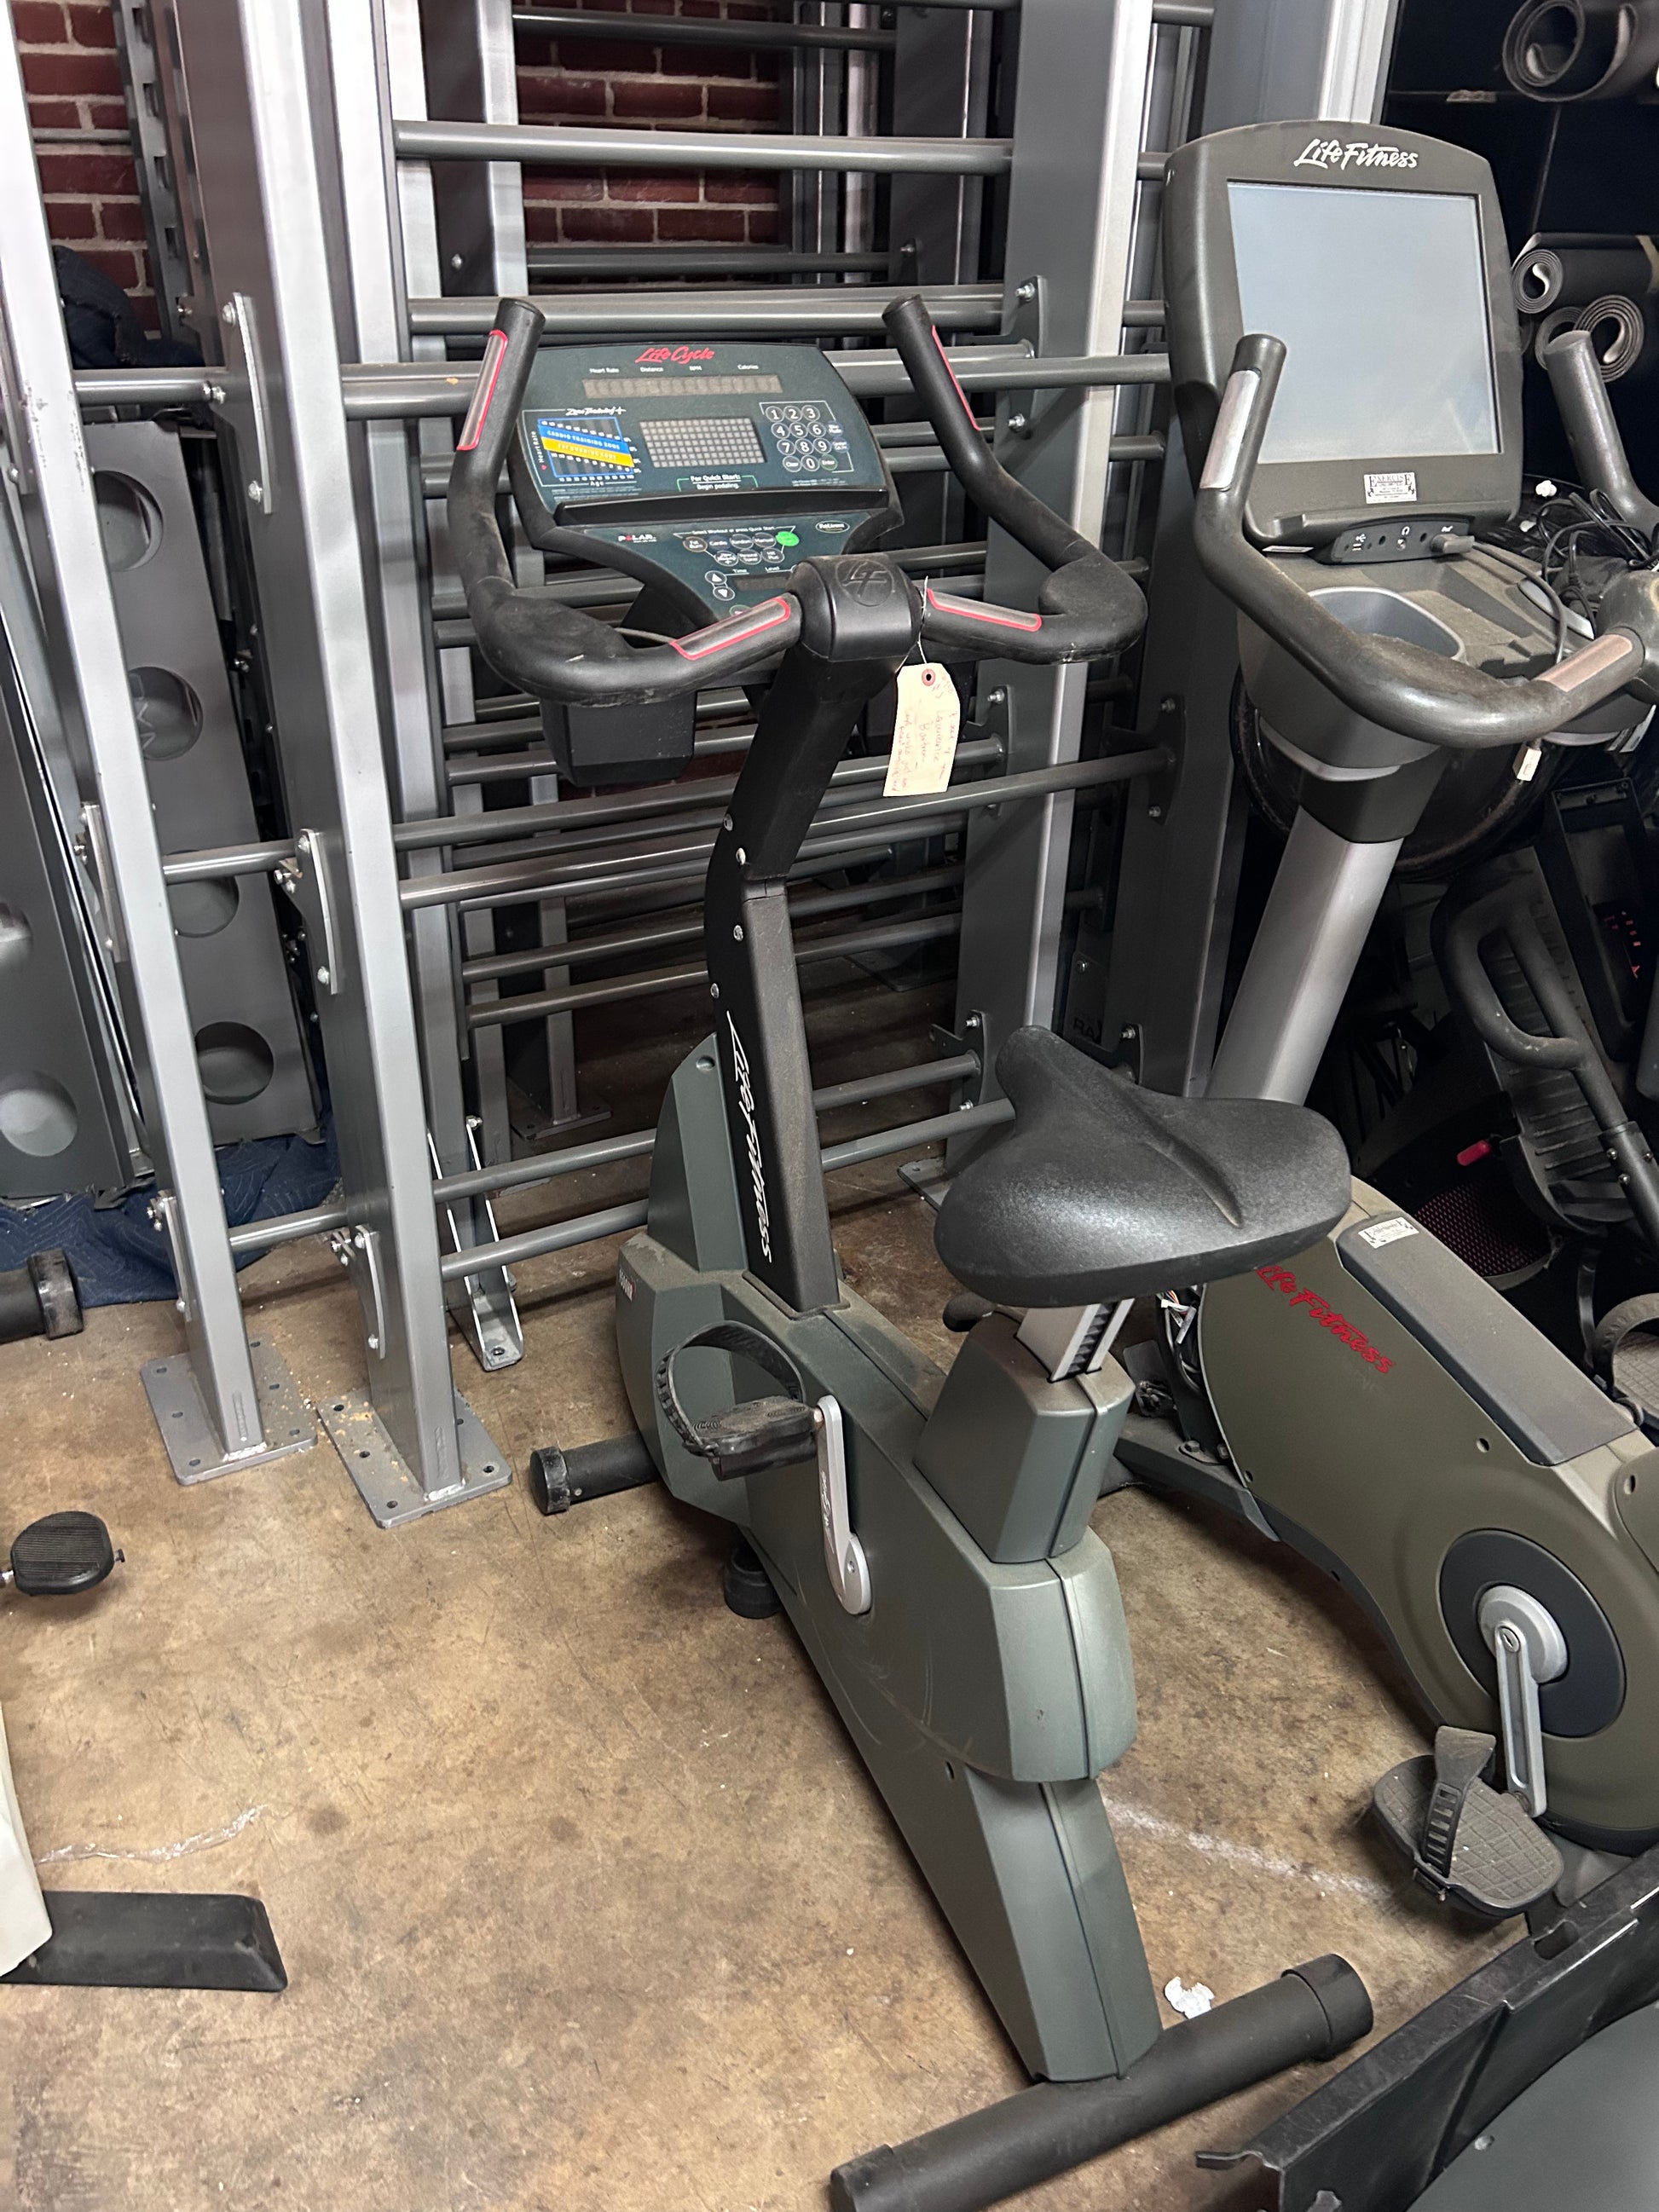 Pre-Owned Life Fitness 9500HR Upright Bike - ExerciseUnlimited